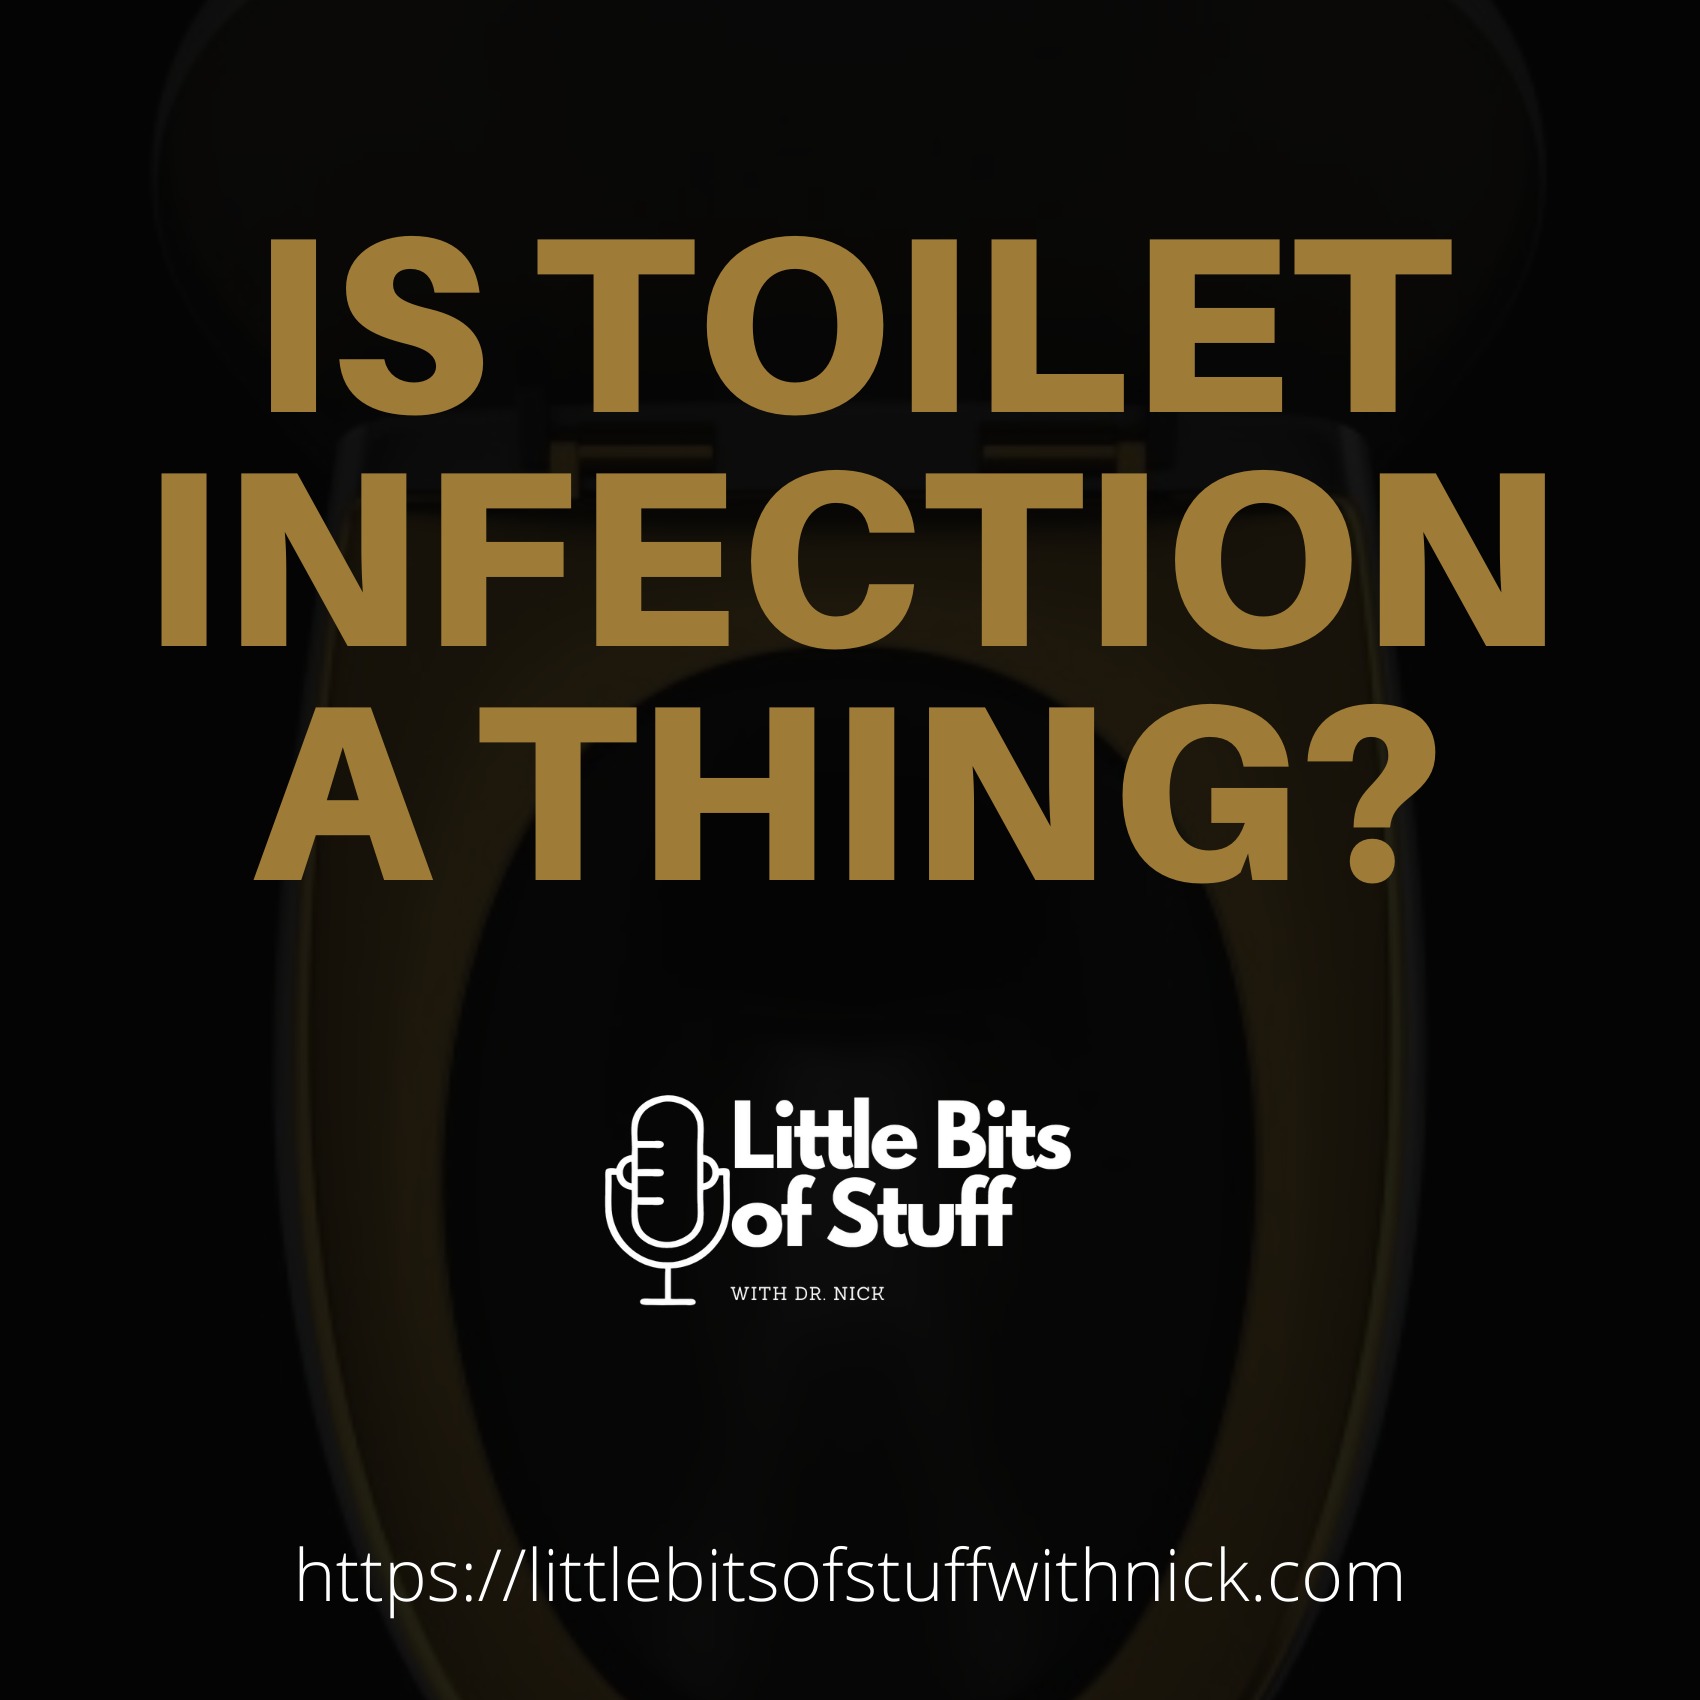 Toilet infection image for little bits of stuff blog